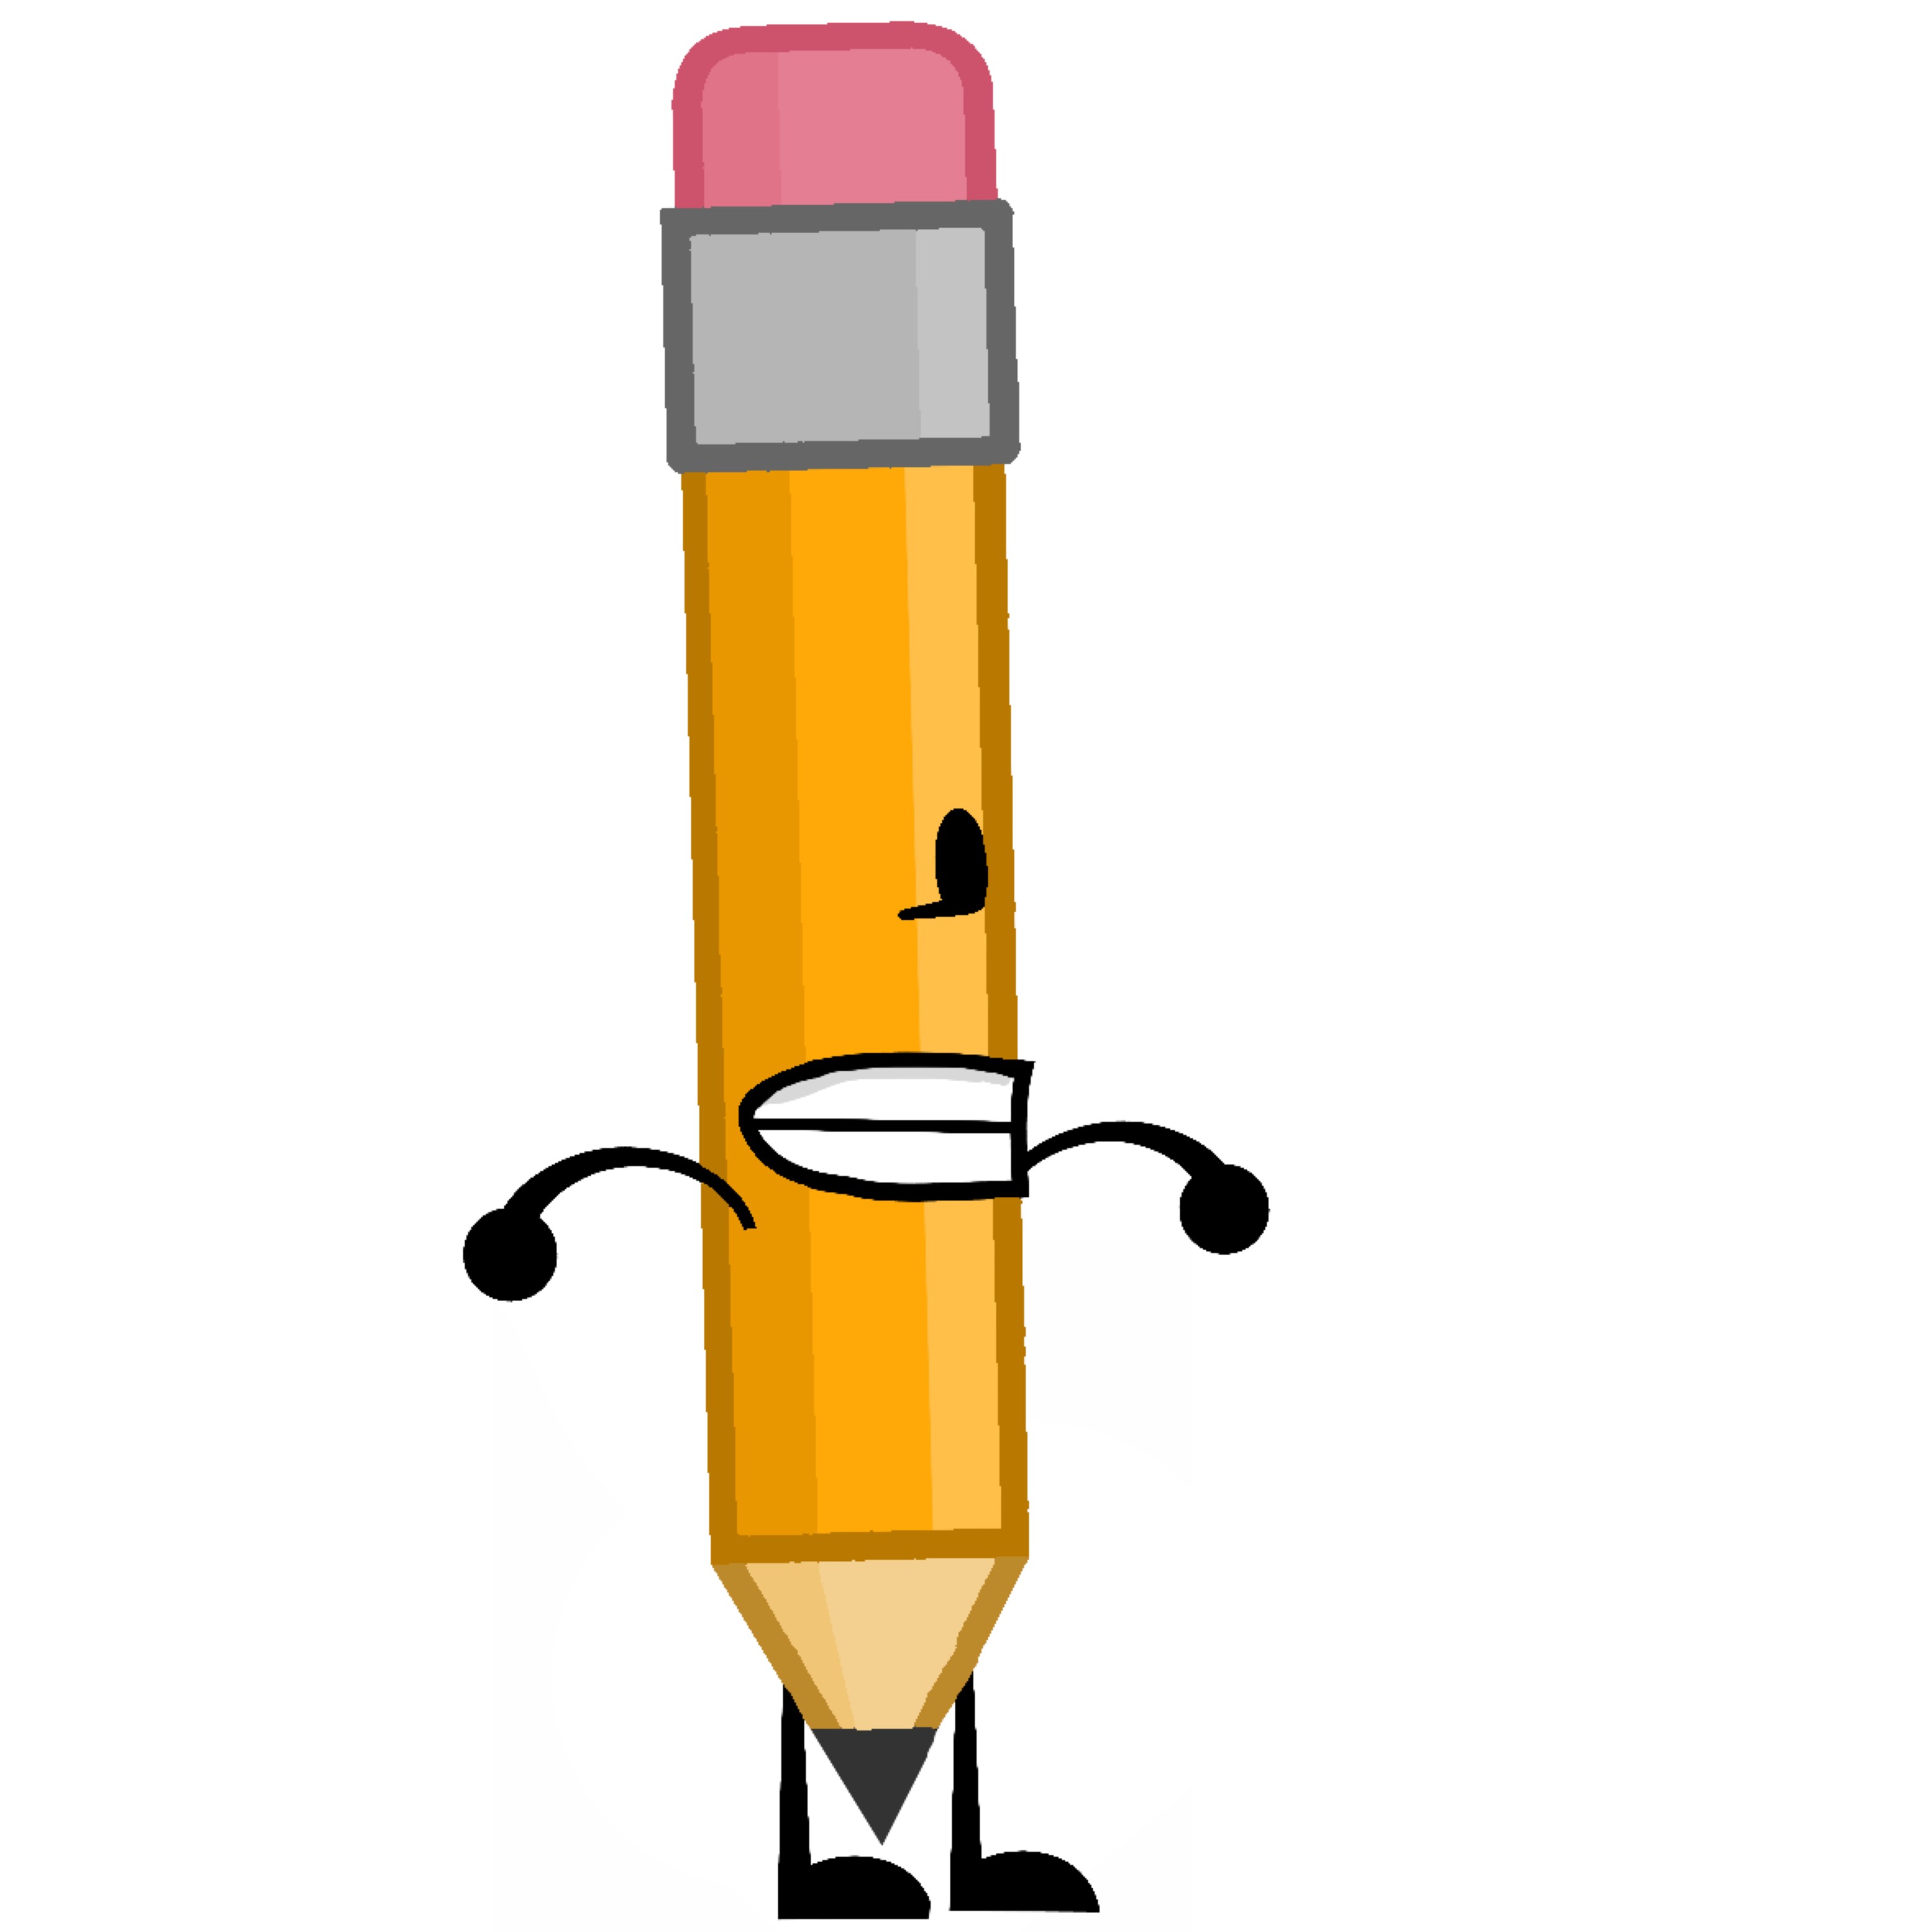 This visual is about bfb bfdi pencil freetoedit #BFB #BFDI #Pencil #freetoe...